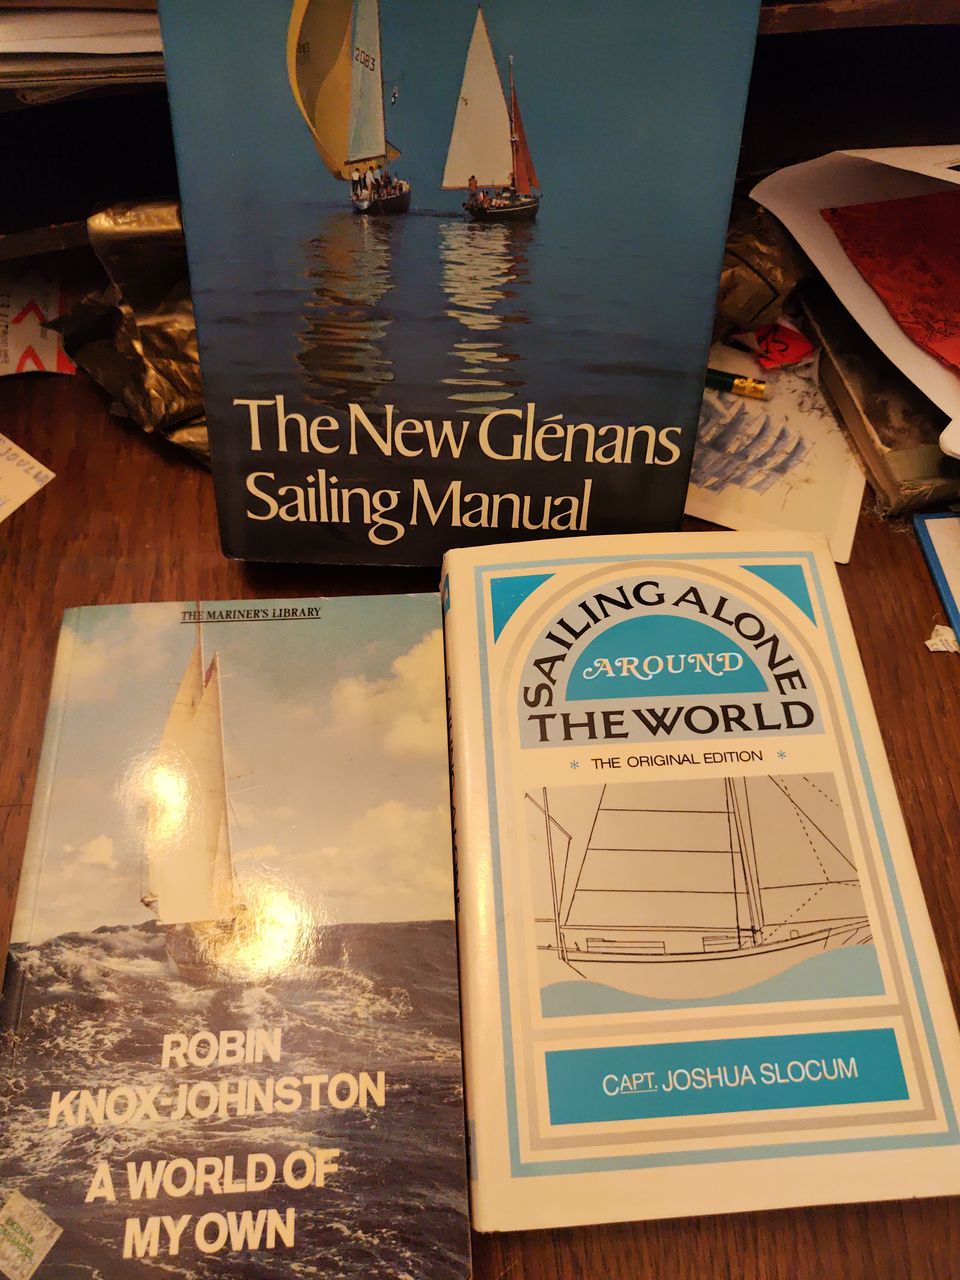 A world of my own - Sailing alone around the world -Sailing manual